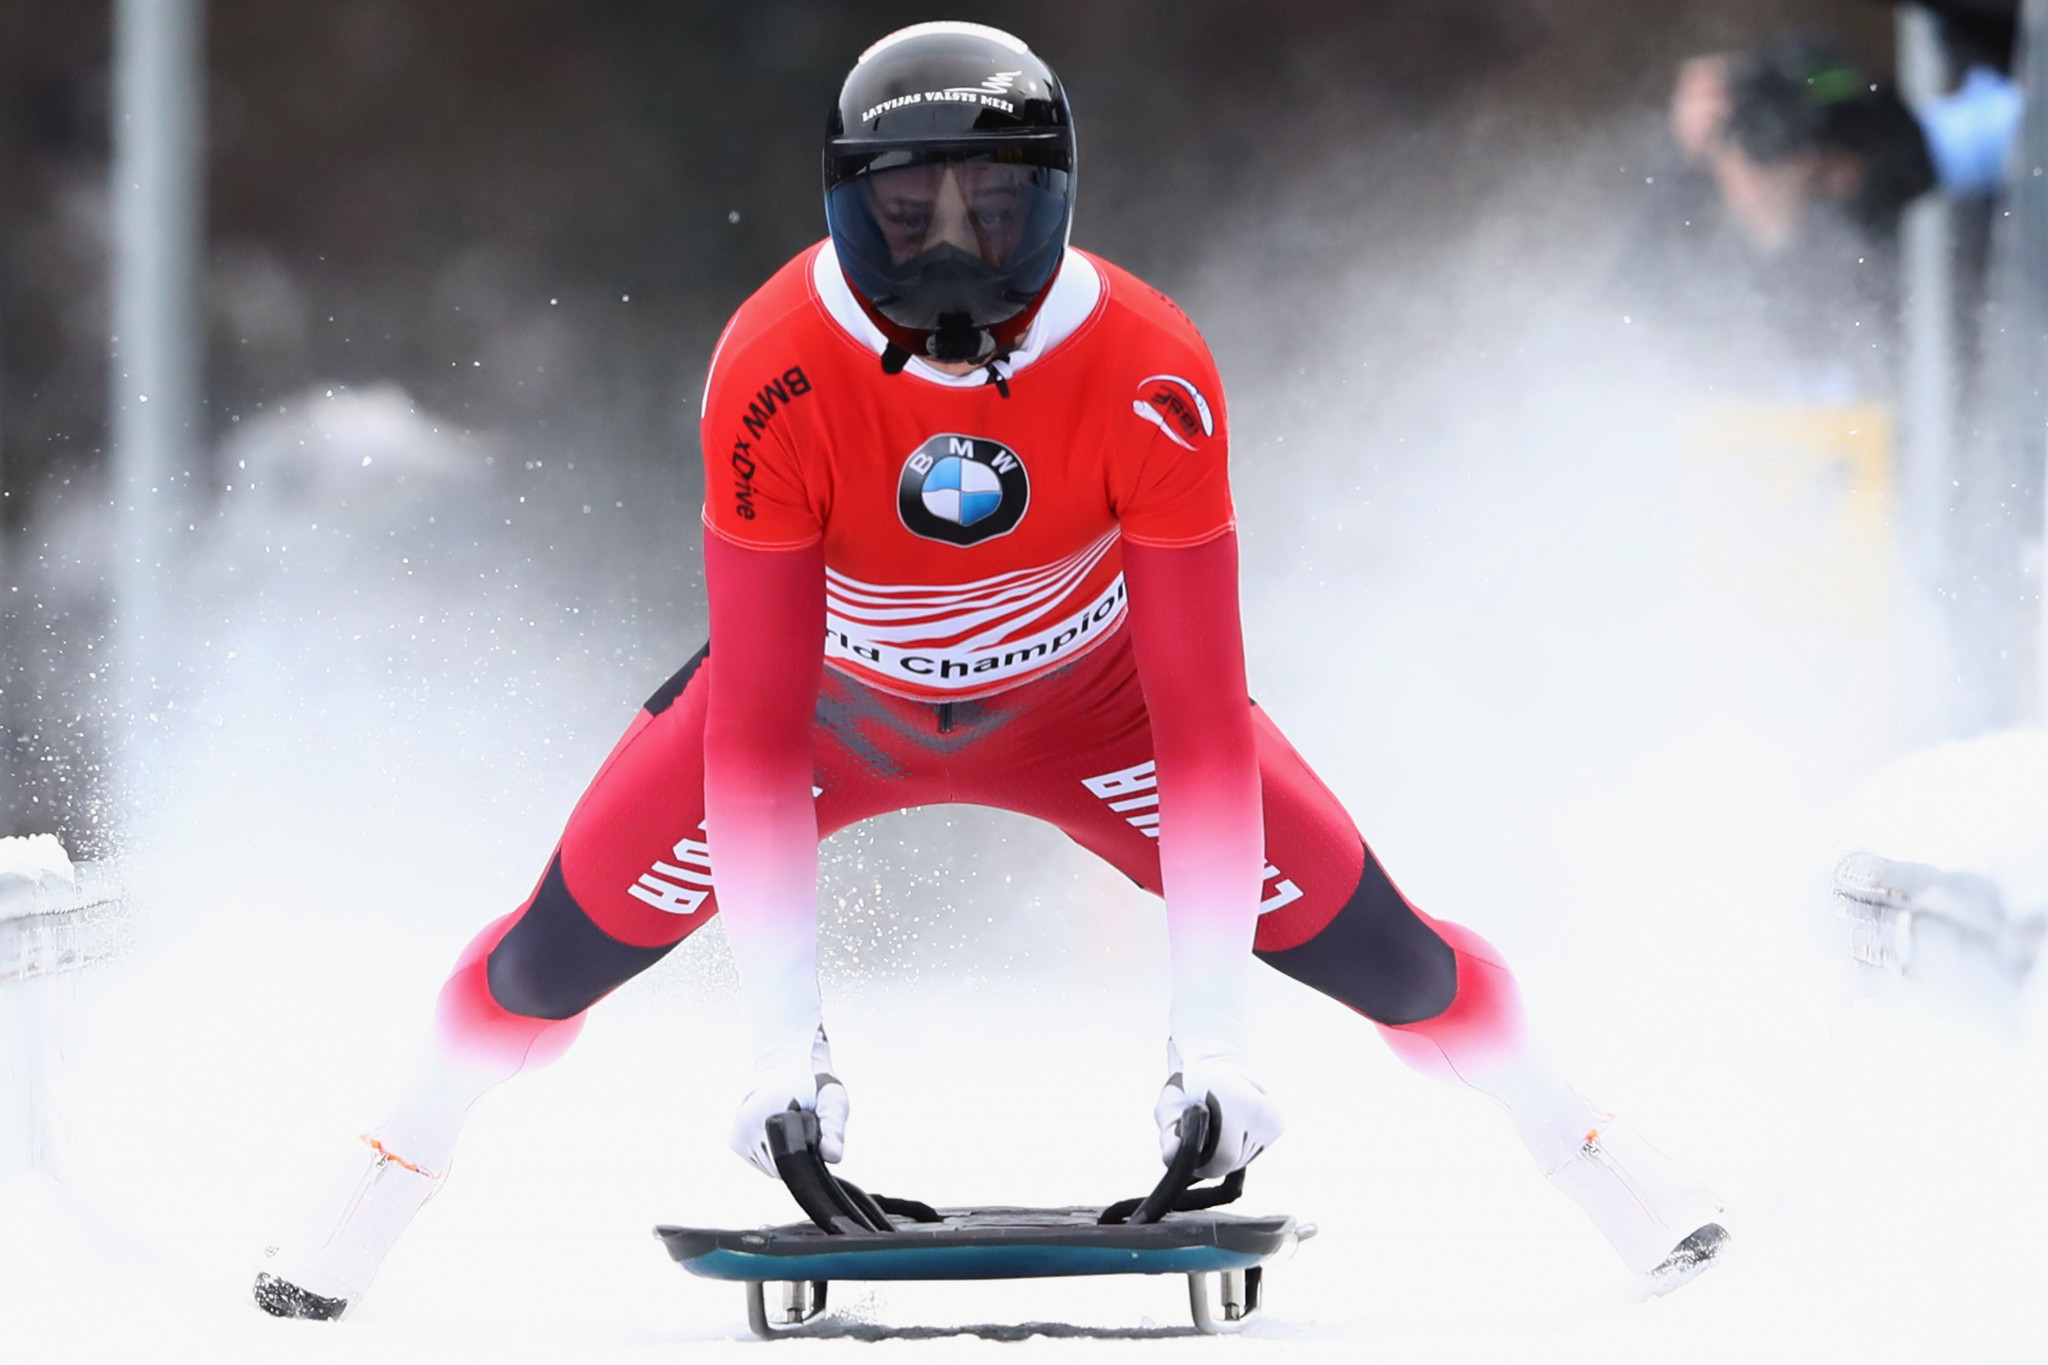 Martins Dukurs is in line to be upgraded to the men's skeleton gold medal from Sochi 2014 ©Getty Images